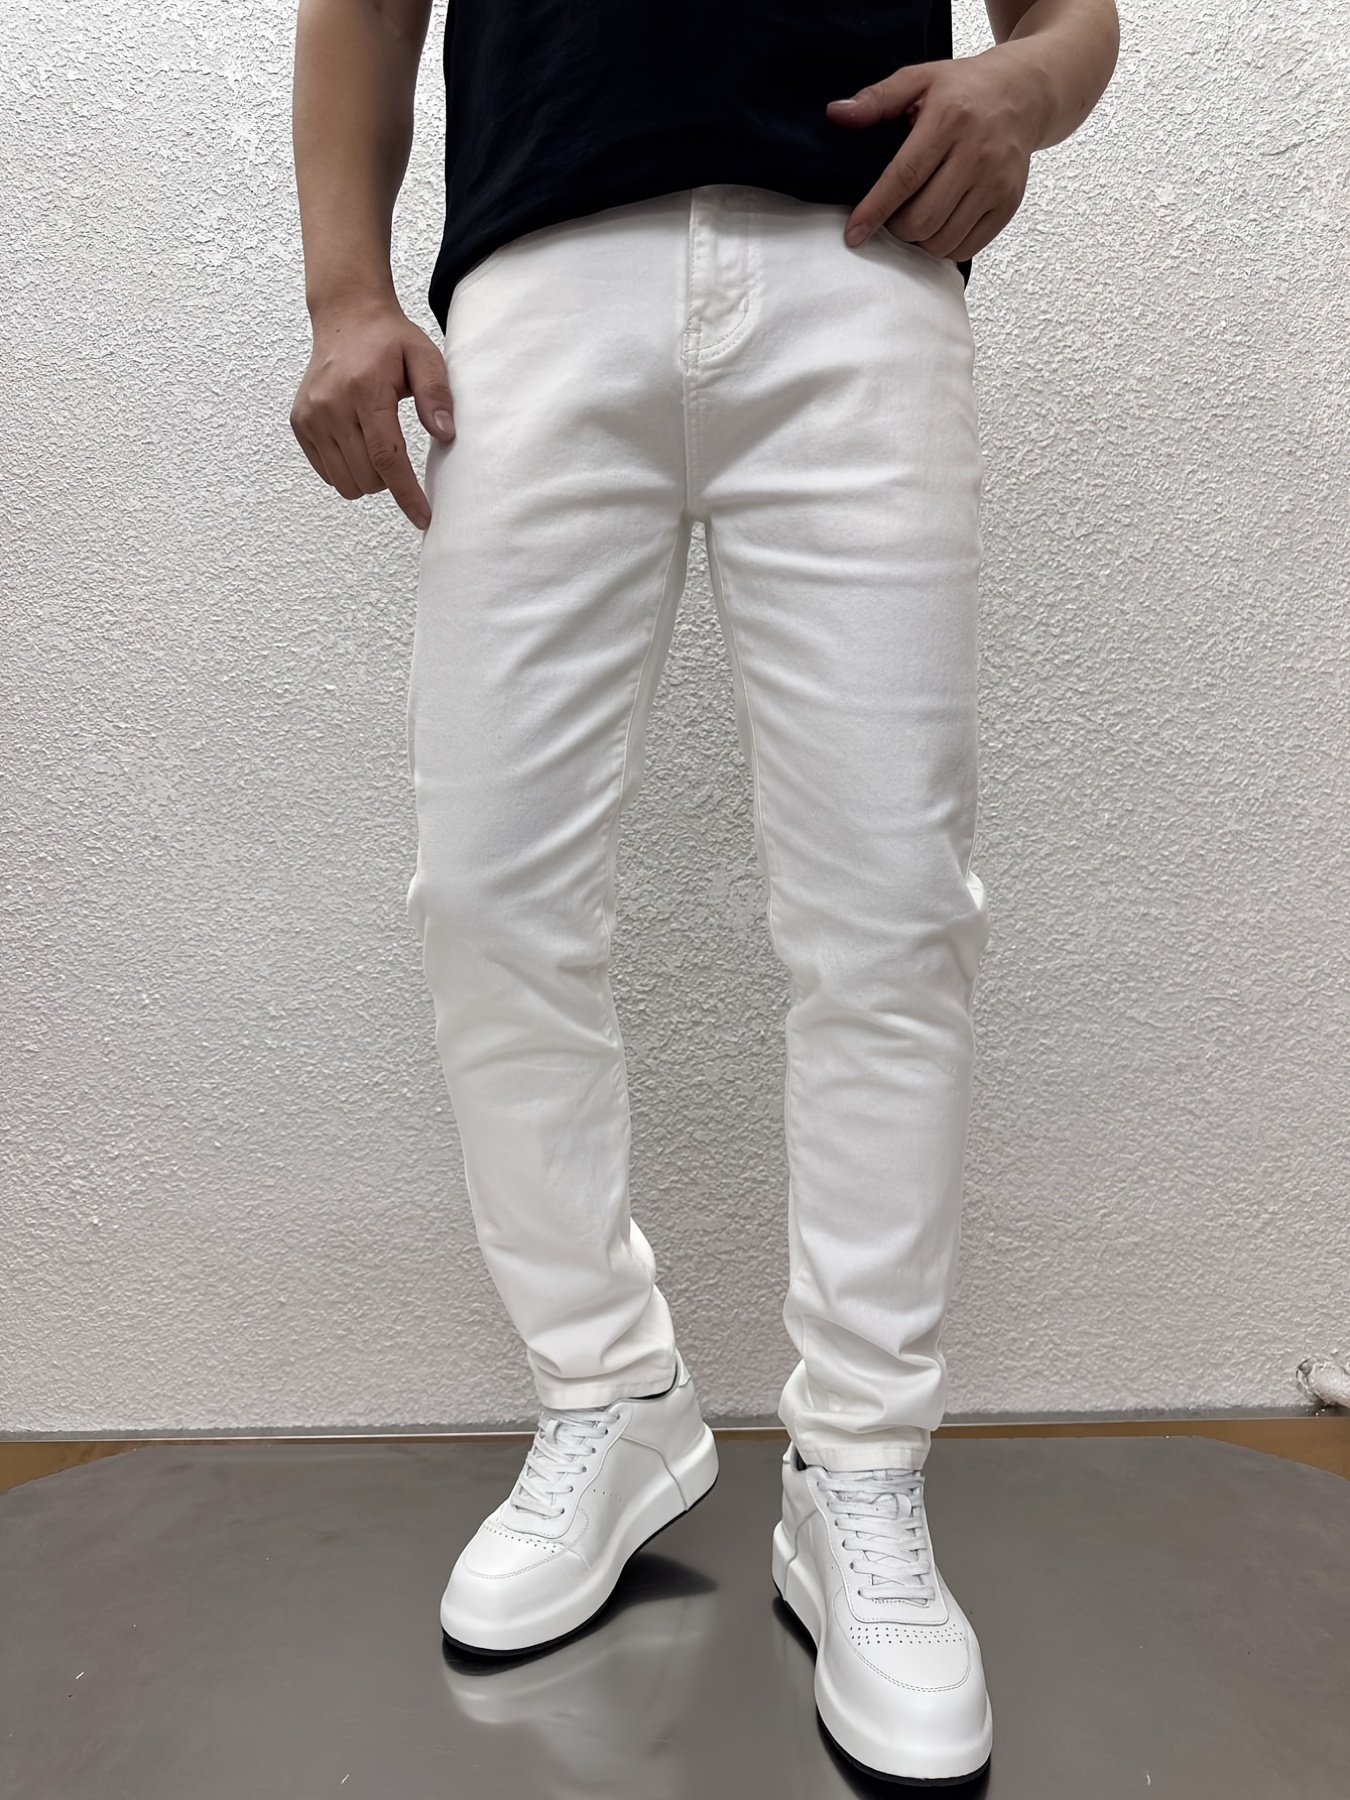 Buy Off White Trousers  Pants for Men by US Polo Assn Online  Ajiocom